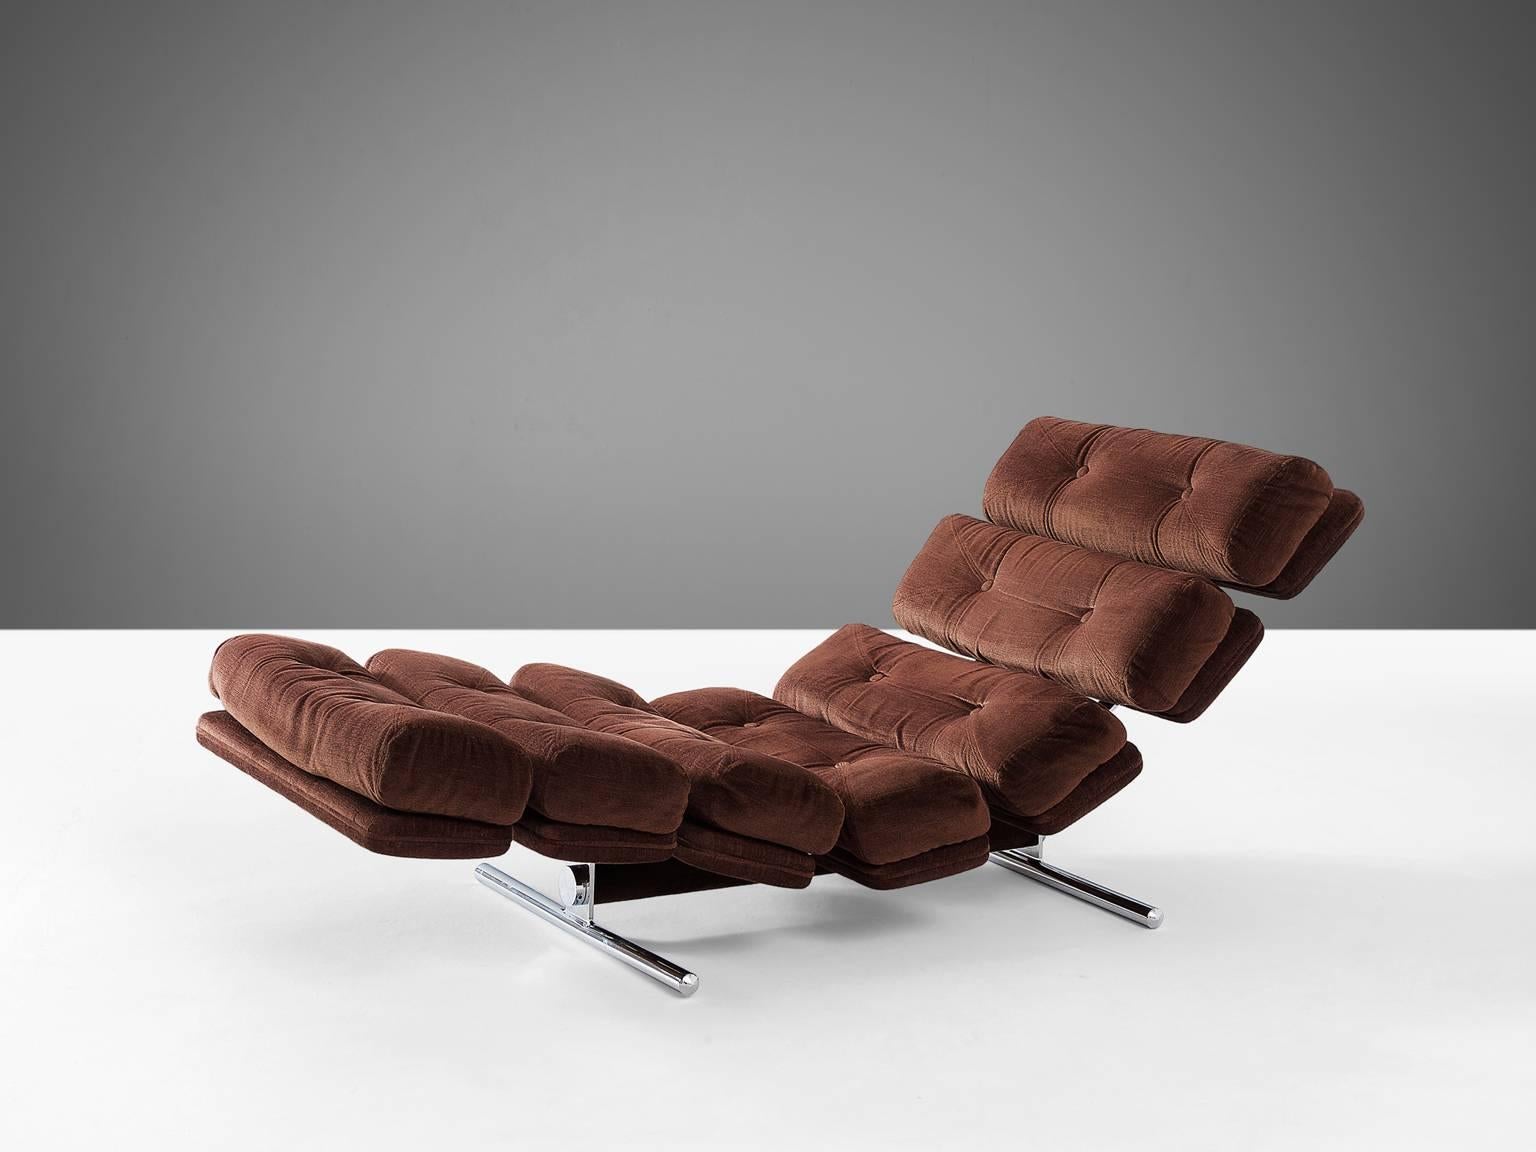 Ric Deforche for Gervan, chaise longue model 'Lord,' brown fabric and steel, Belgium, 1970.

Fantastic daybed in steel and brown fabric upholstery. This design dates from the 1970s. The segmented seating gives this lounge chair a nice curve and